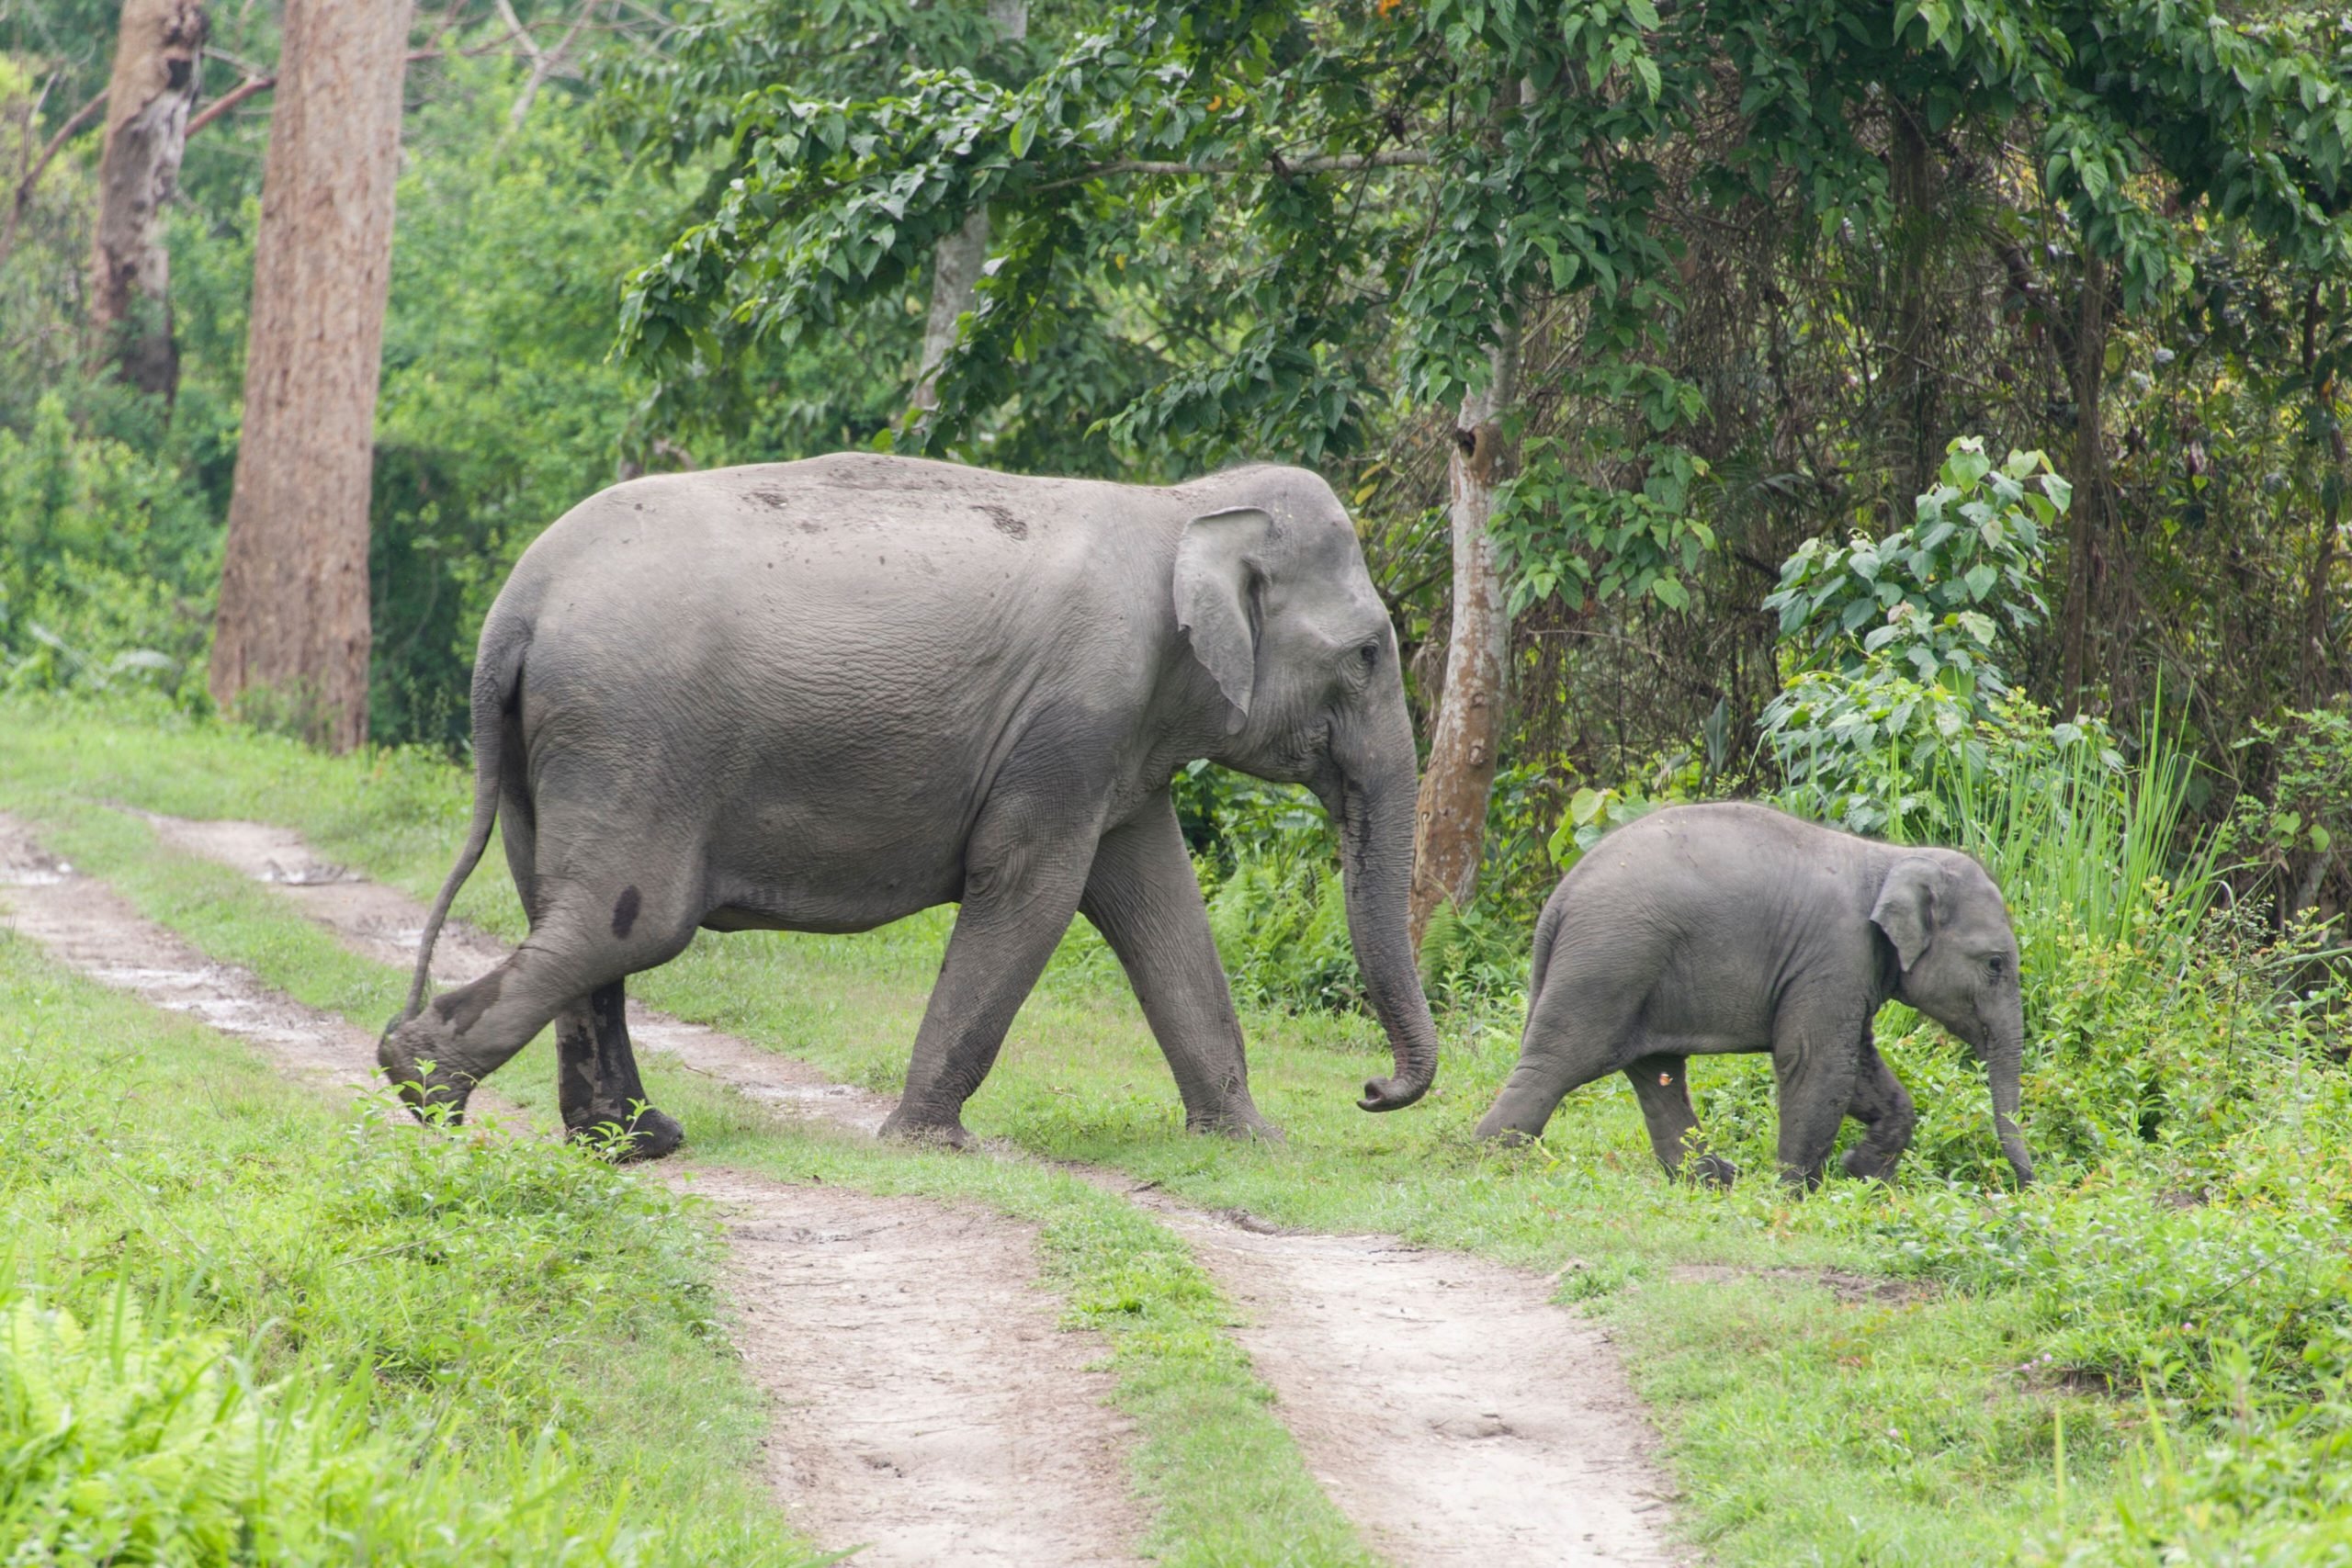 Elephant reserves in India need protection from fossil fuel interests